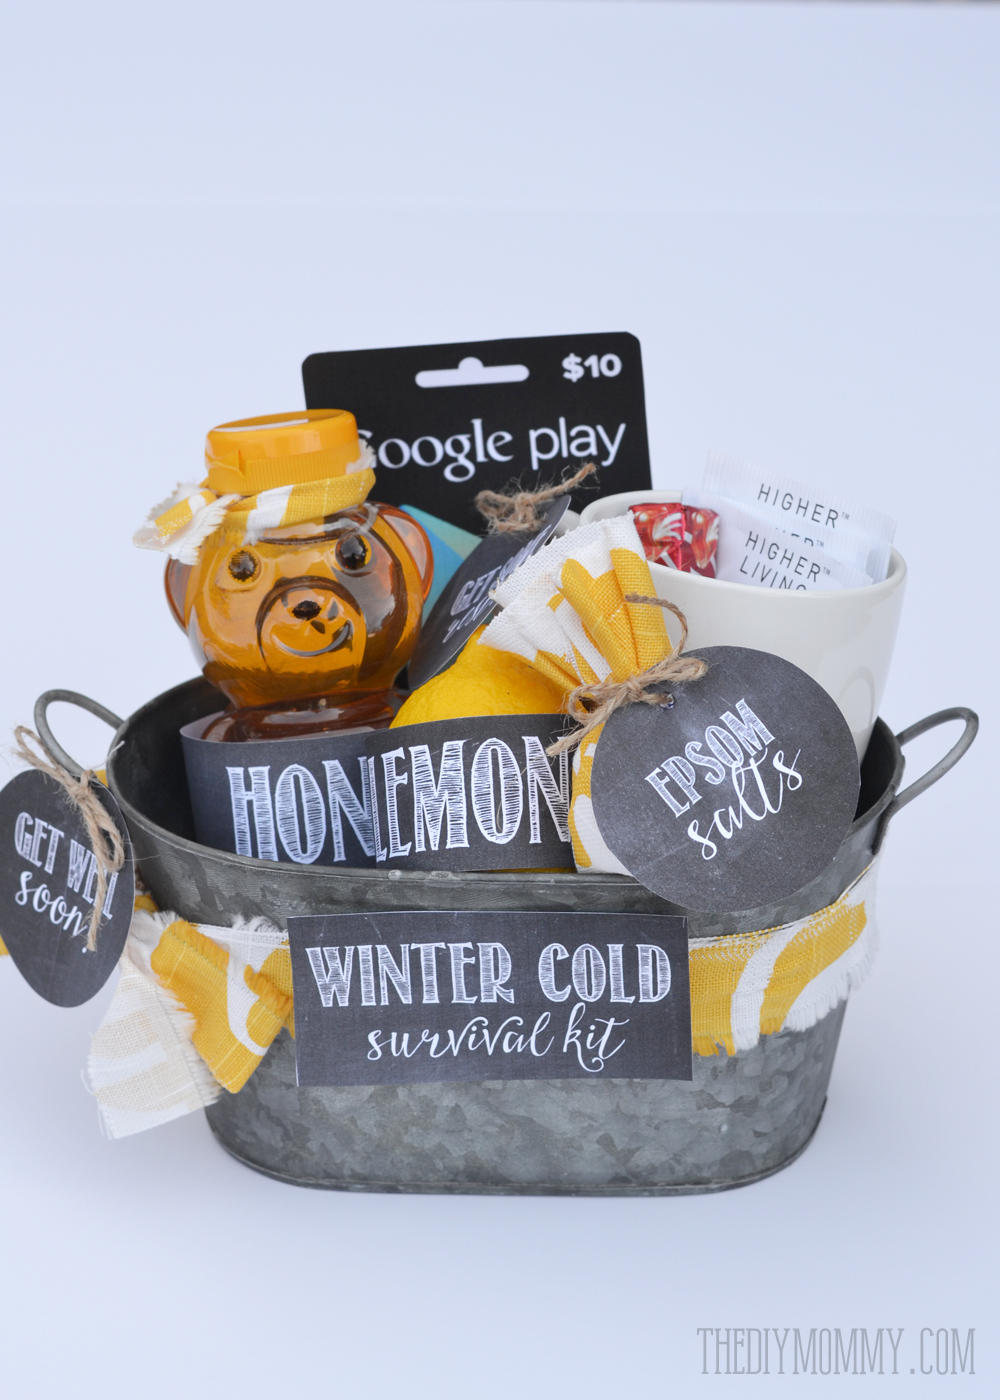 Winter Cold Survival Kit: This makes a great, unique gift! Honey, lemon, gift card, epsom salts, tea cup, tea, cough drops and free printables!